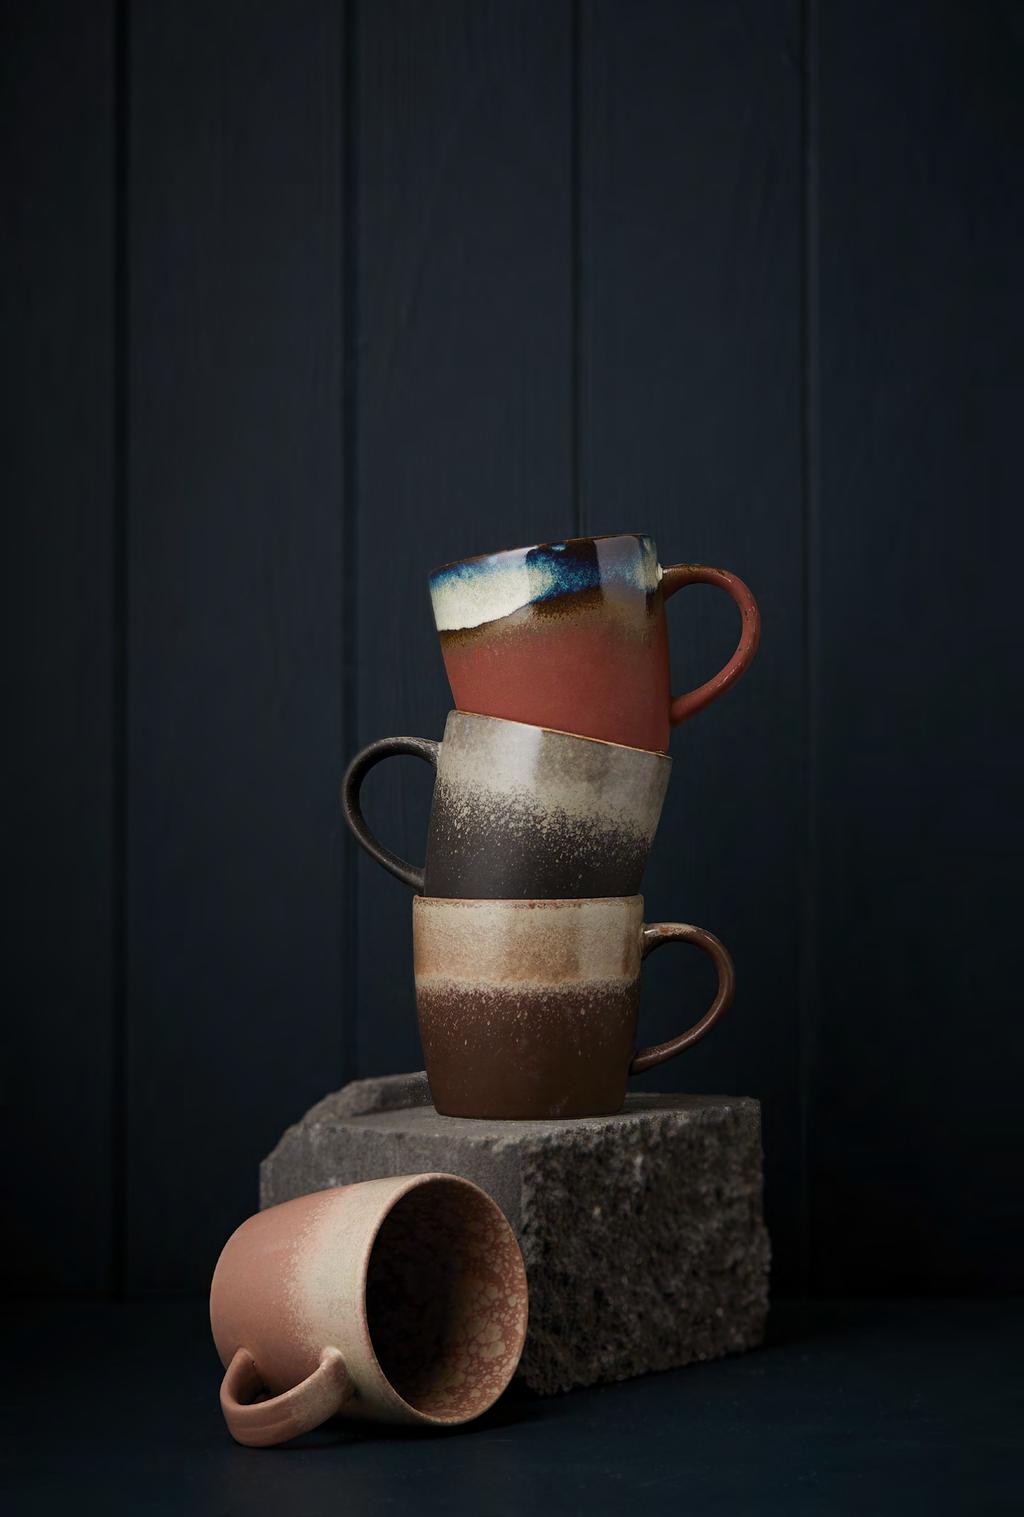 elements A POTTERS CRAFT Celebrate the craft of pottery with our striking new Elements mugs.